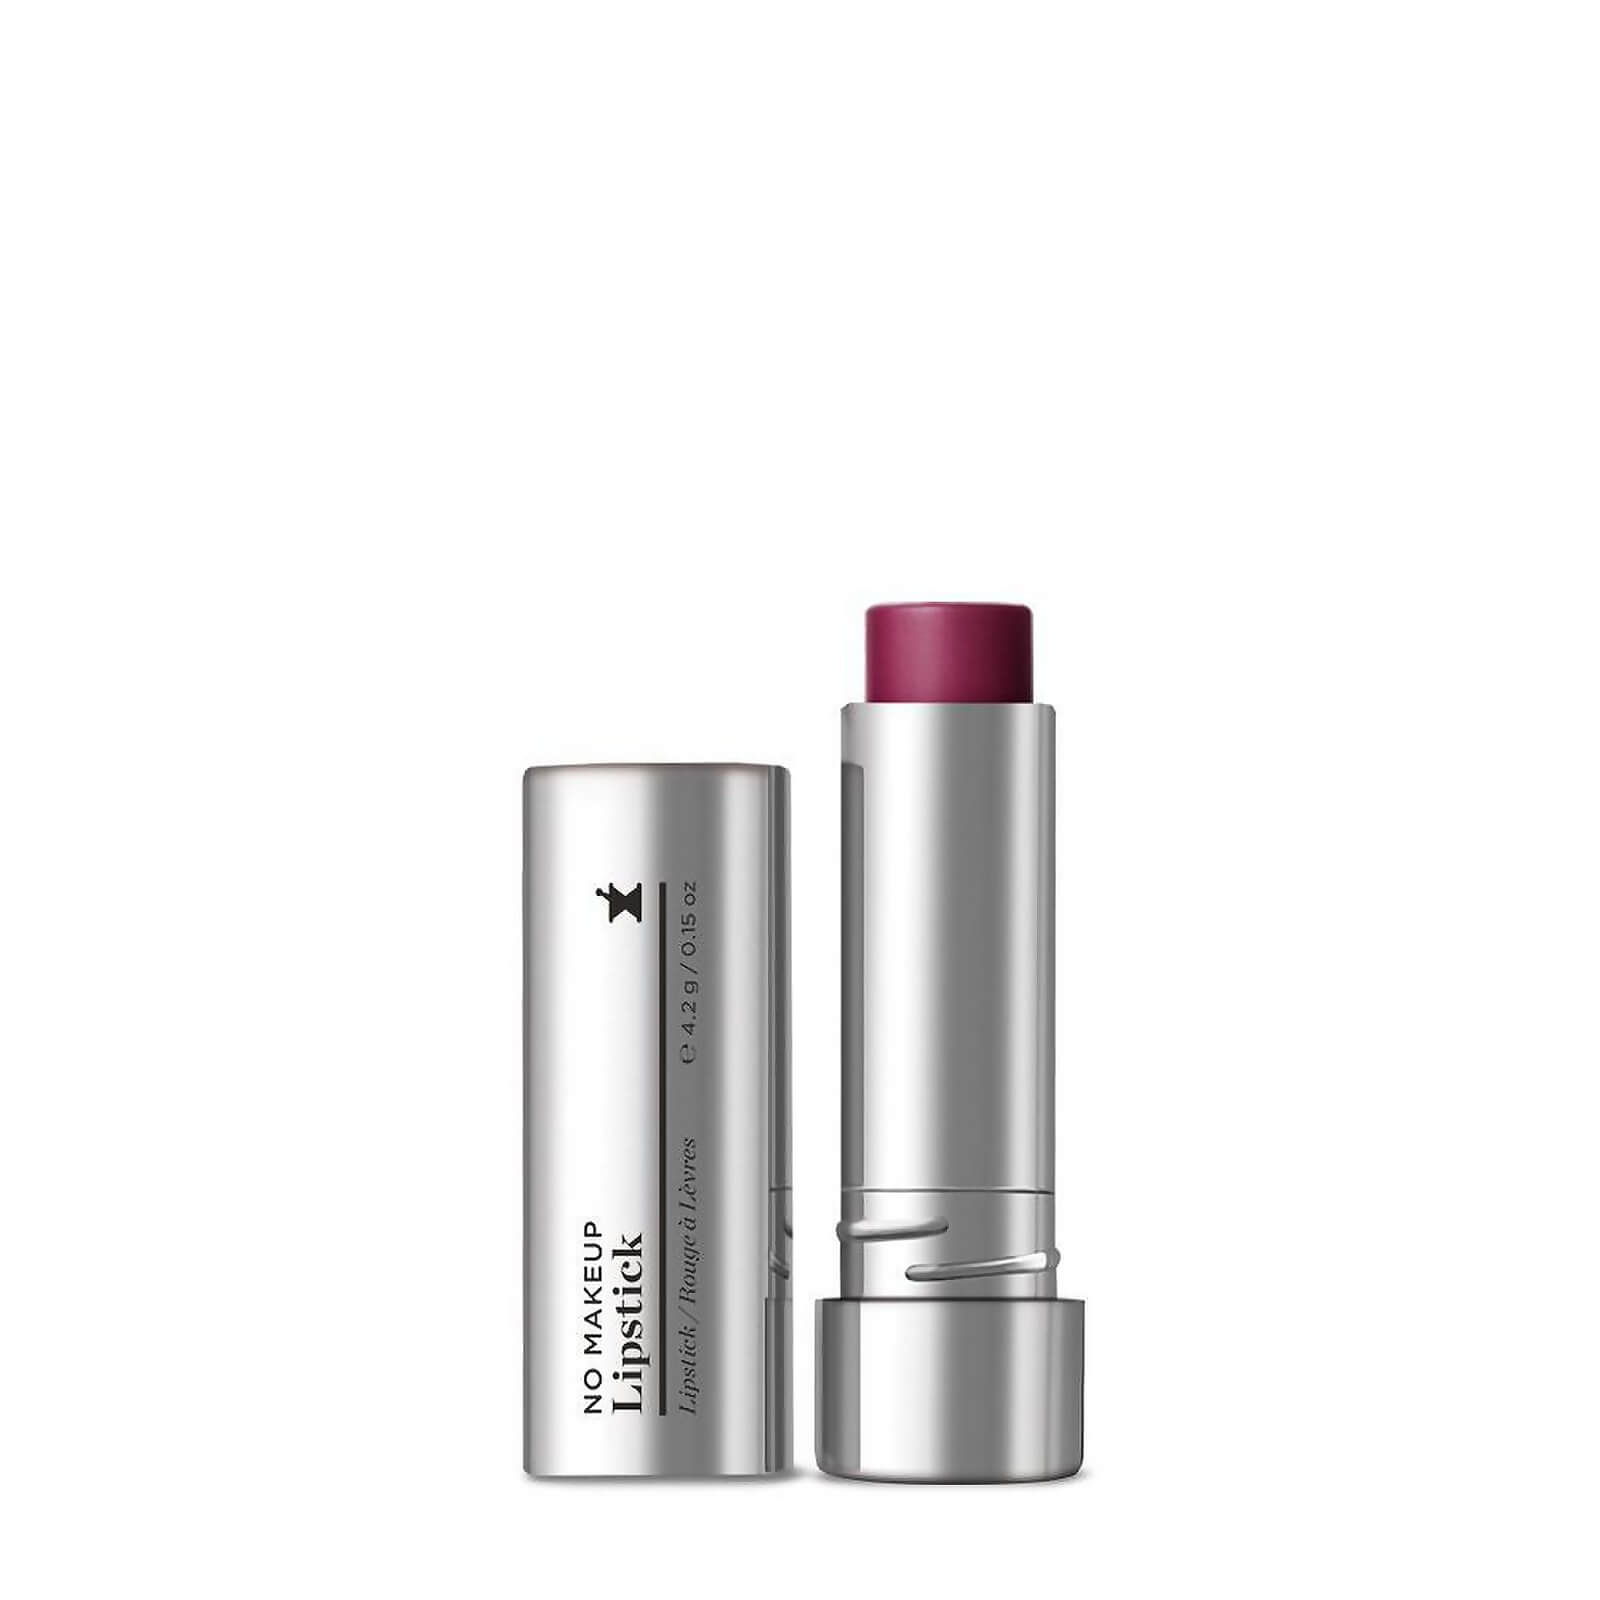 Perricone MD No Makeup Lipstick Broad Spectrum SPF15 4.2g (Various Shades) - 5 Cognac